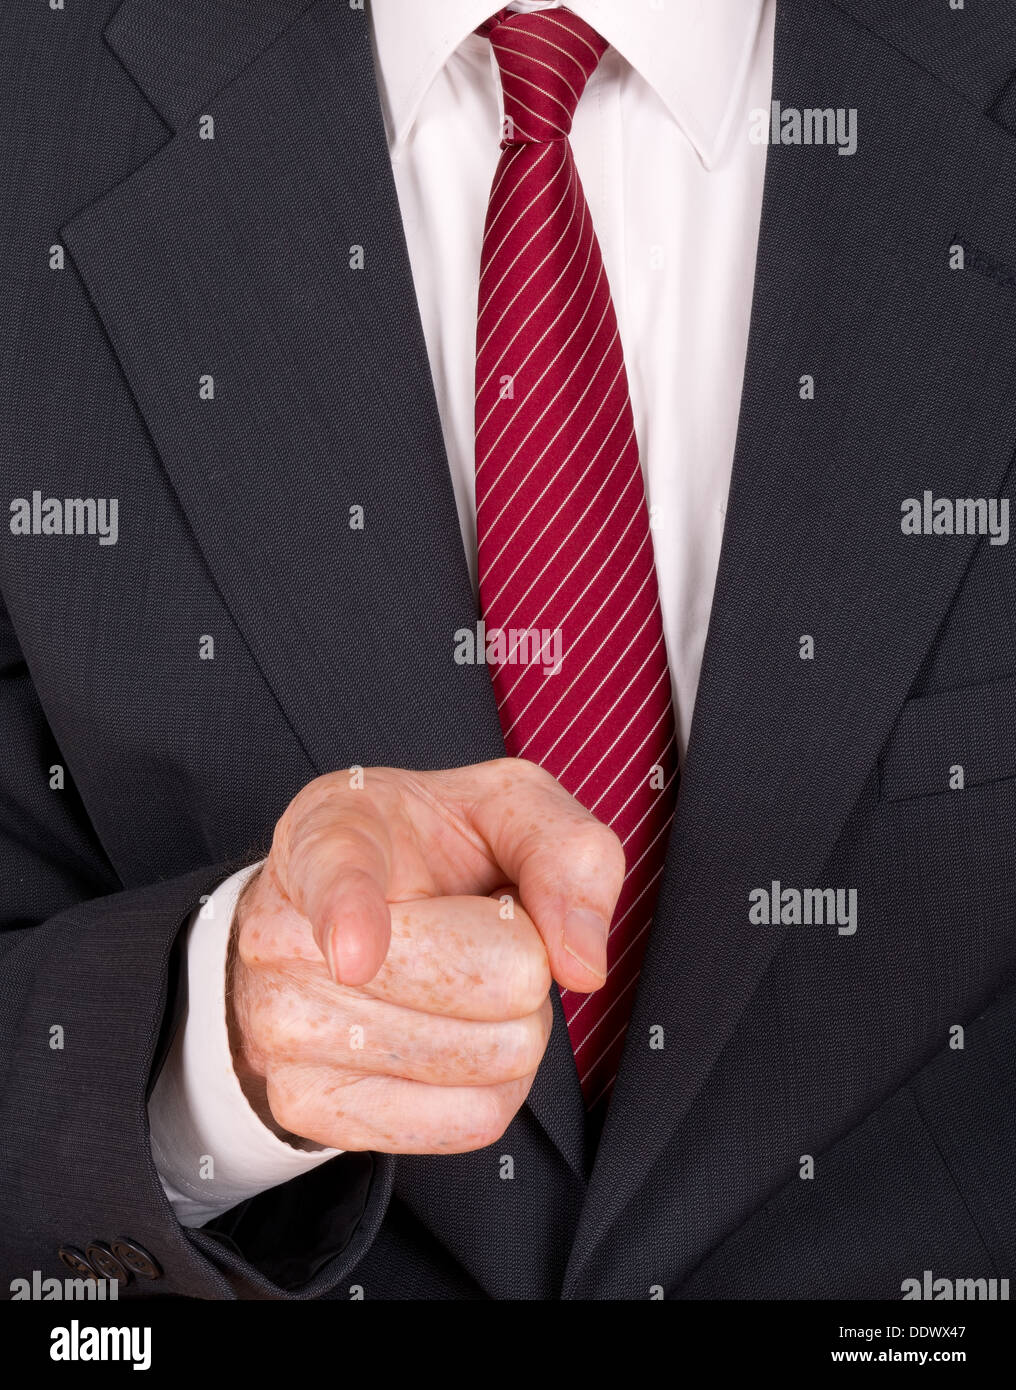 Aggressive office bully - man pointing finger Stock Photo